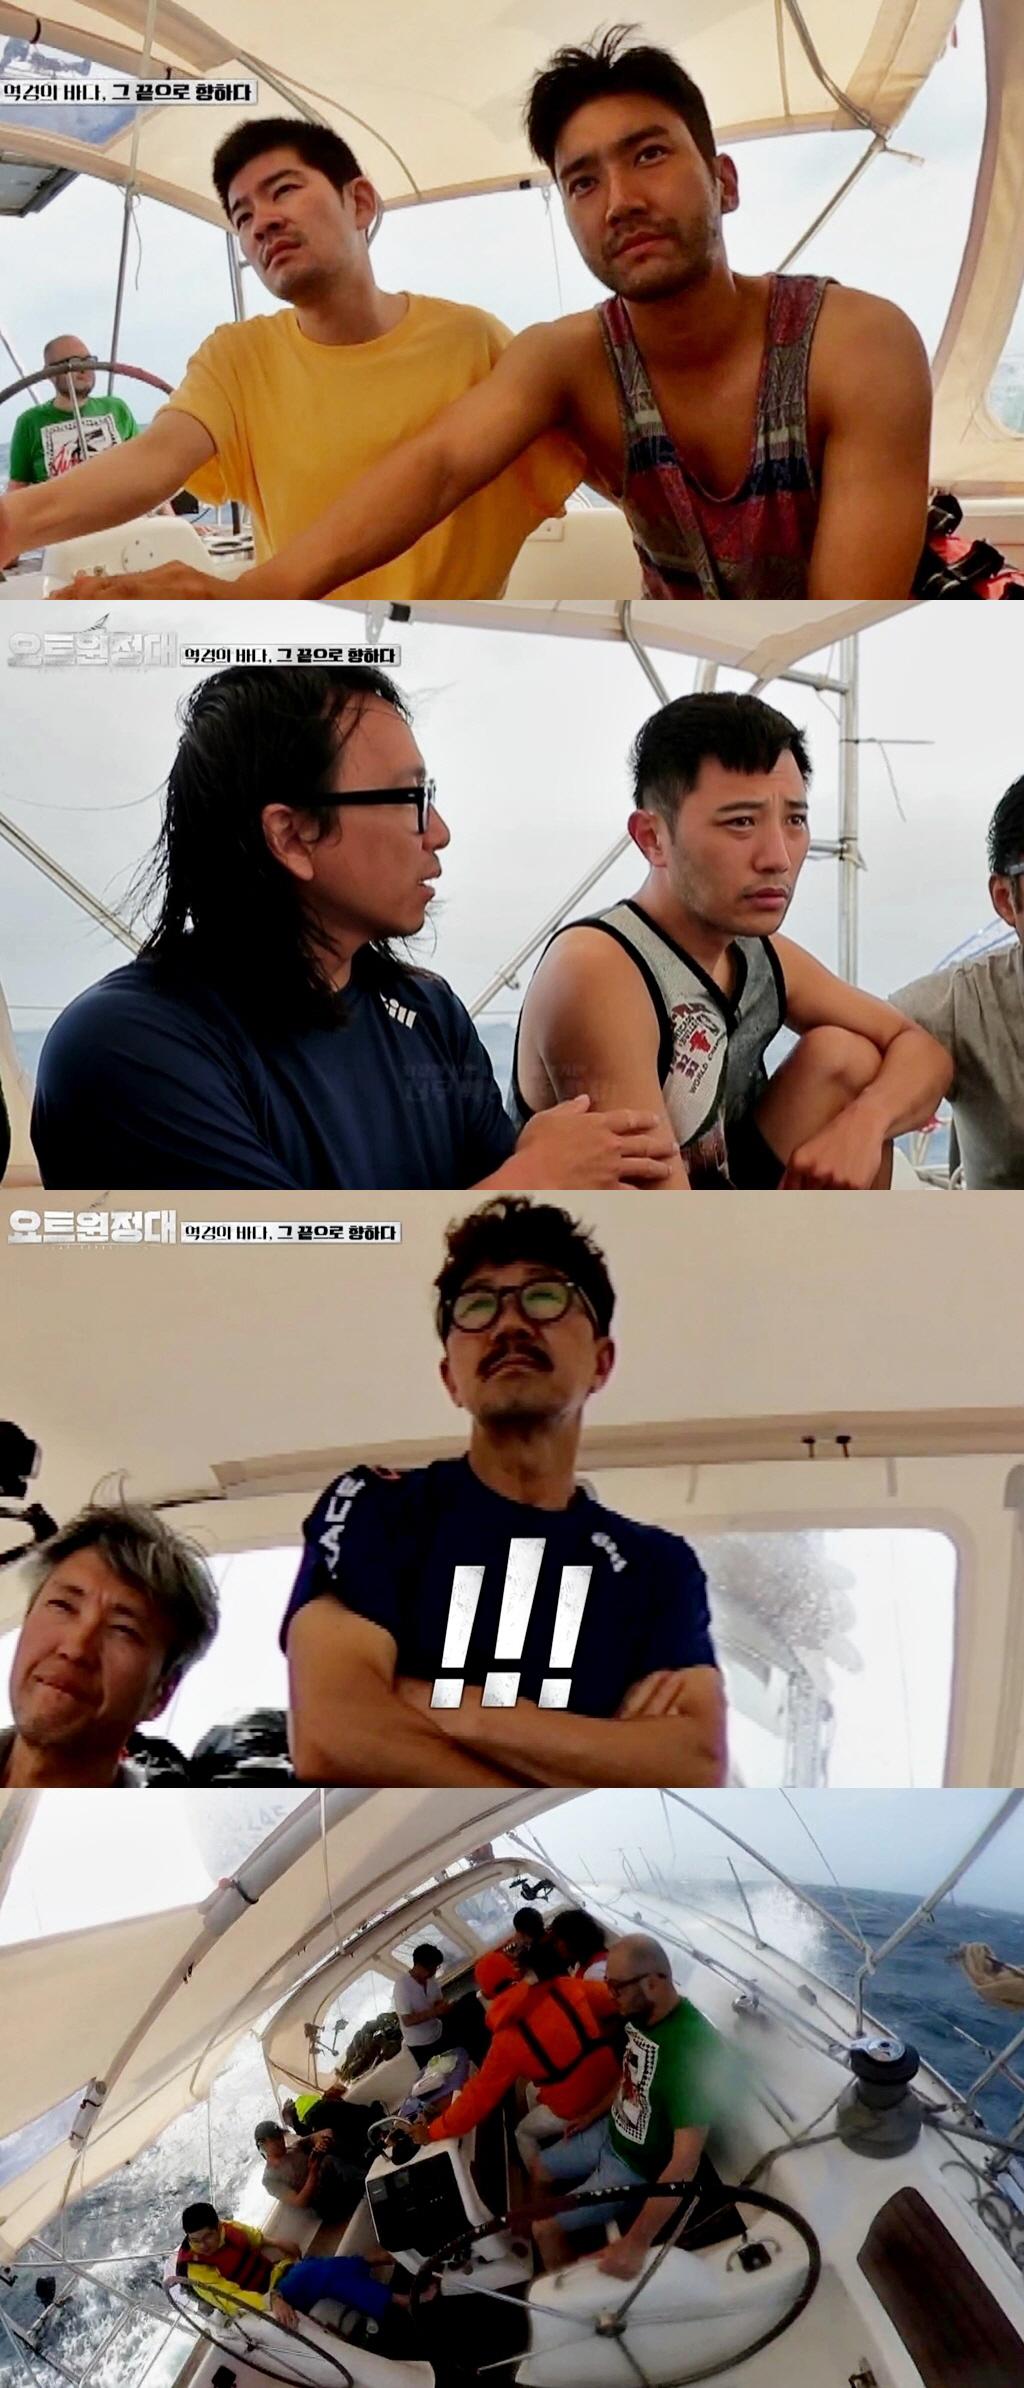 Yot Expedition Jin Goo - Choi Siwon - Chang Kiha - Song Ho-joon is hit by the worst Danger ever since the voyage.In the 6th MBC Everlon Yot Expedition broadcast on September 21, there is a picture of Jin Goo - Choi Siwon - Chang Kiha - Song Ho-joon who is driven by the extreme storms.The Pacific Ocean survival period of the Yot Expedition crews who feel the power of nature all over the body will be unfolded realistically.The yacht expedition members who met the 6th day of the voyage said that they were whitened by the power of the typhoon on the sea for the first time in their lives.The crew tried to hold on, but they were mentally and physically exhausted in situations that were not as good as they were.To make matters worse, all of them were in an inability to communicate with the support line.At this time, Captain Kim Seung-jin made an emergency proposal to the crew as if he had decided something.However, no one could answer it, and Chang Kiha had come to ask the production team to stop shooting.The appearance of the first conflict with the unusual person who hovers around the yacht makes the tension soar with the previous class Danger.It was a yot expedition that continued its Pacific Ocean voyage with the aim of the Southern Cross.The storm that I met in the meantime said that I drove the sailing of the Yot Expedition to the worst situation that I could not see ahead.And for the first time, he was even confused, and Danger in the yacht was silent.In an uncontrollable situation, Jin Goo, who was always passionate, and his delightful eldest brother Song Ho-joon showed tears, amplifying their curiosity about what happened to them.What will be the decision of the yacht expedition in the ruins? It can be seen at the 6th MBC Everlon Yot Expedition broadcasted at 8:30 pm on Monday, September 21st.